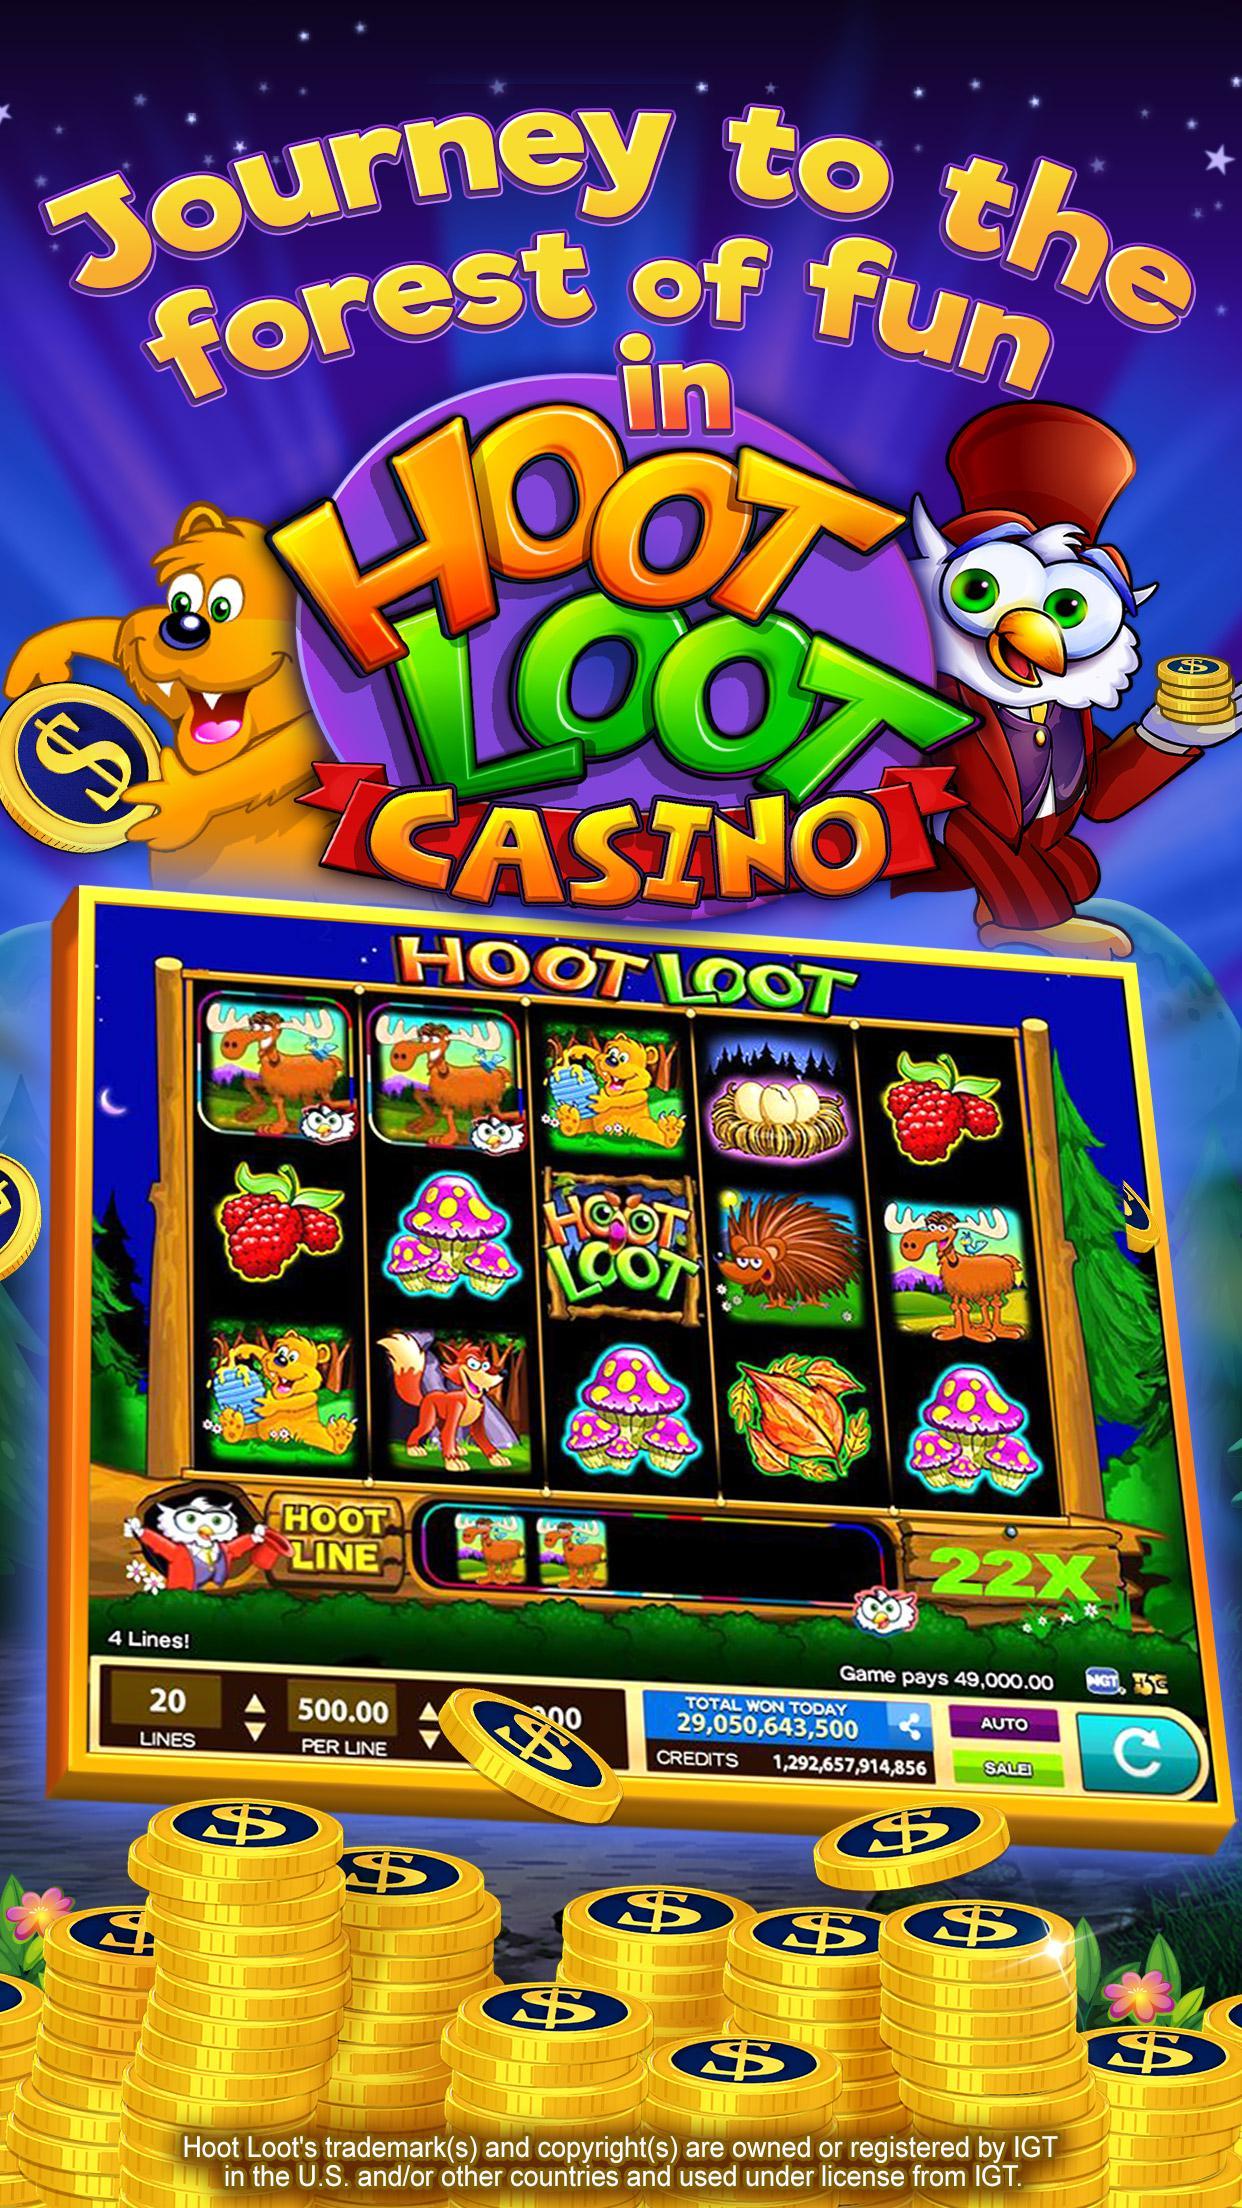 Europa casino download android download